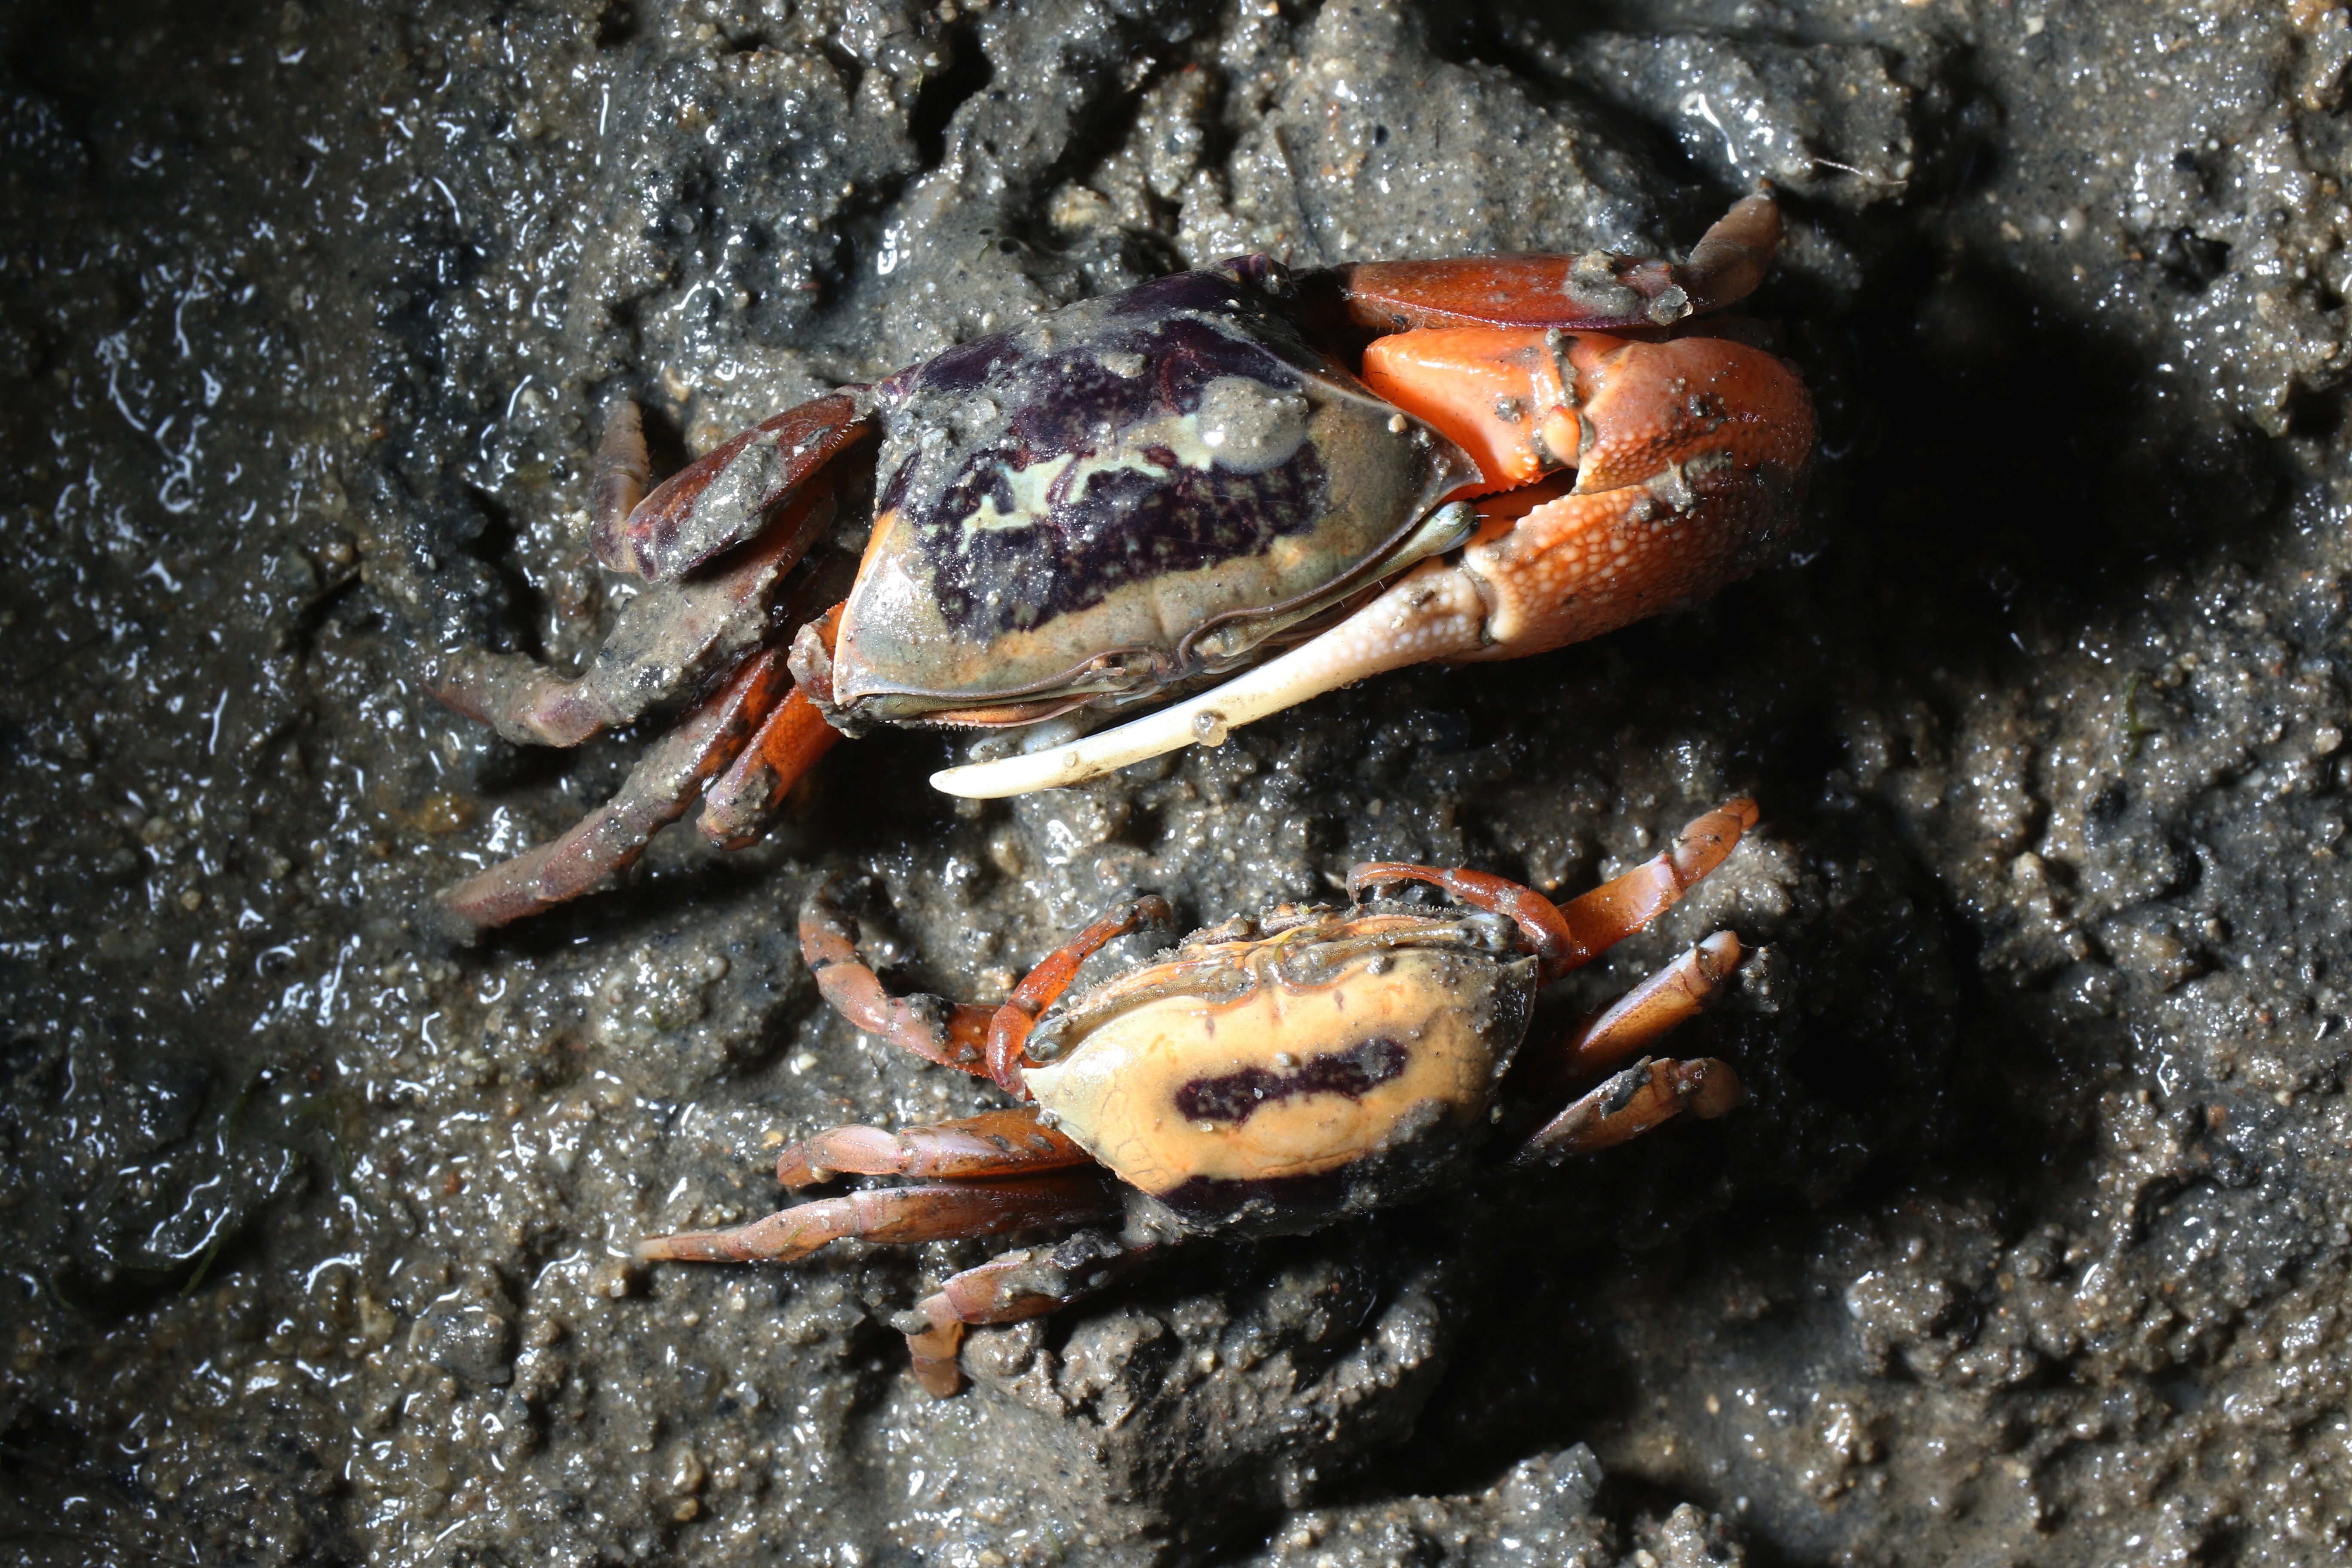 How climate change threatens Hong Kong's vital fiddler crabs and